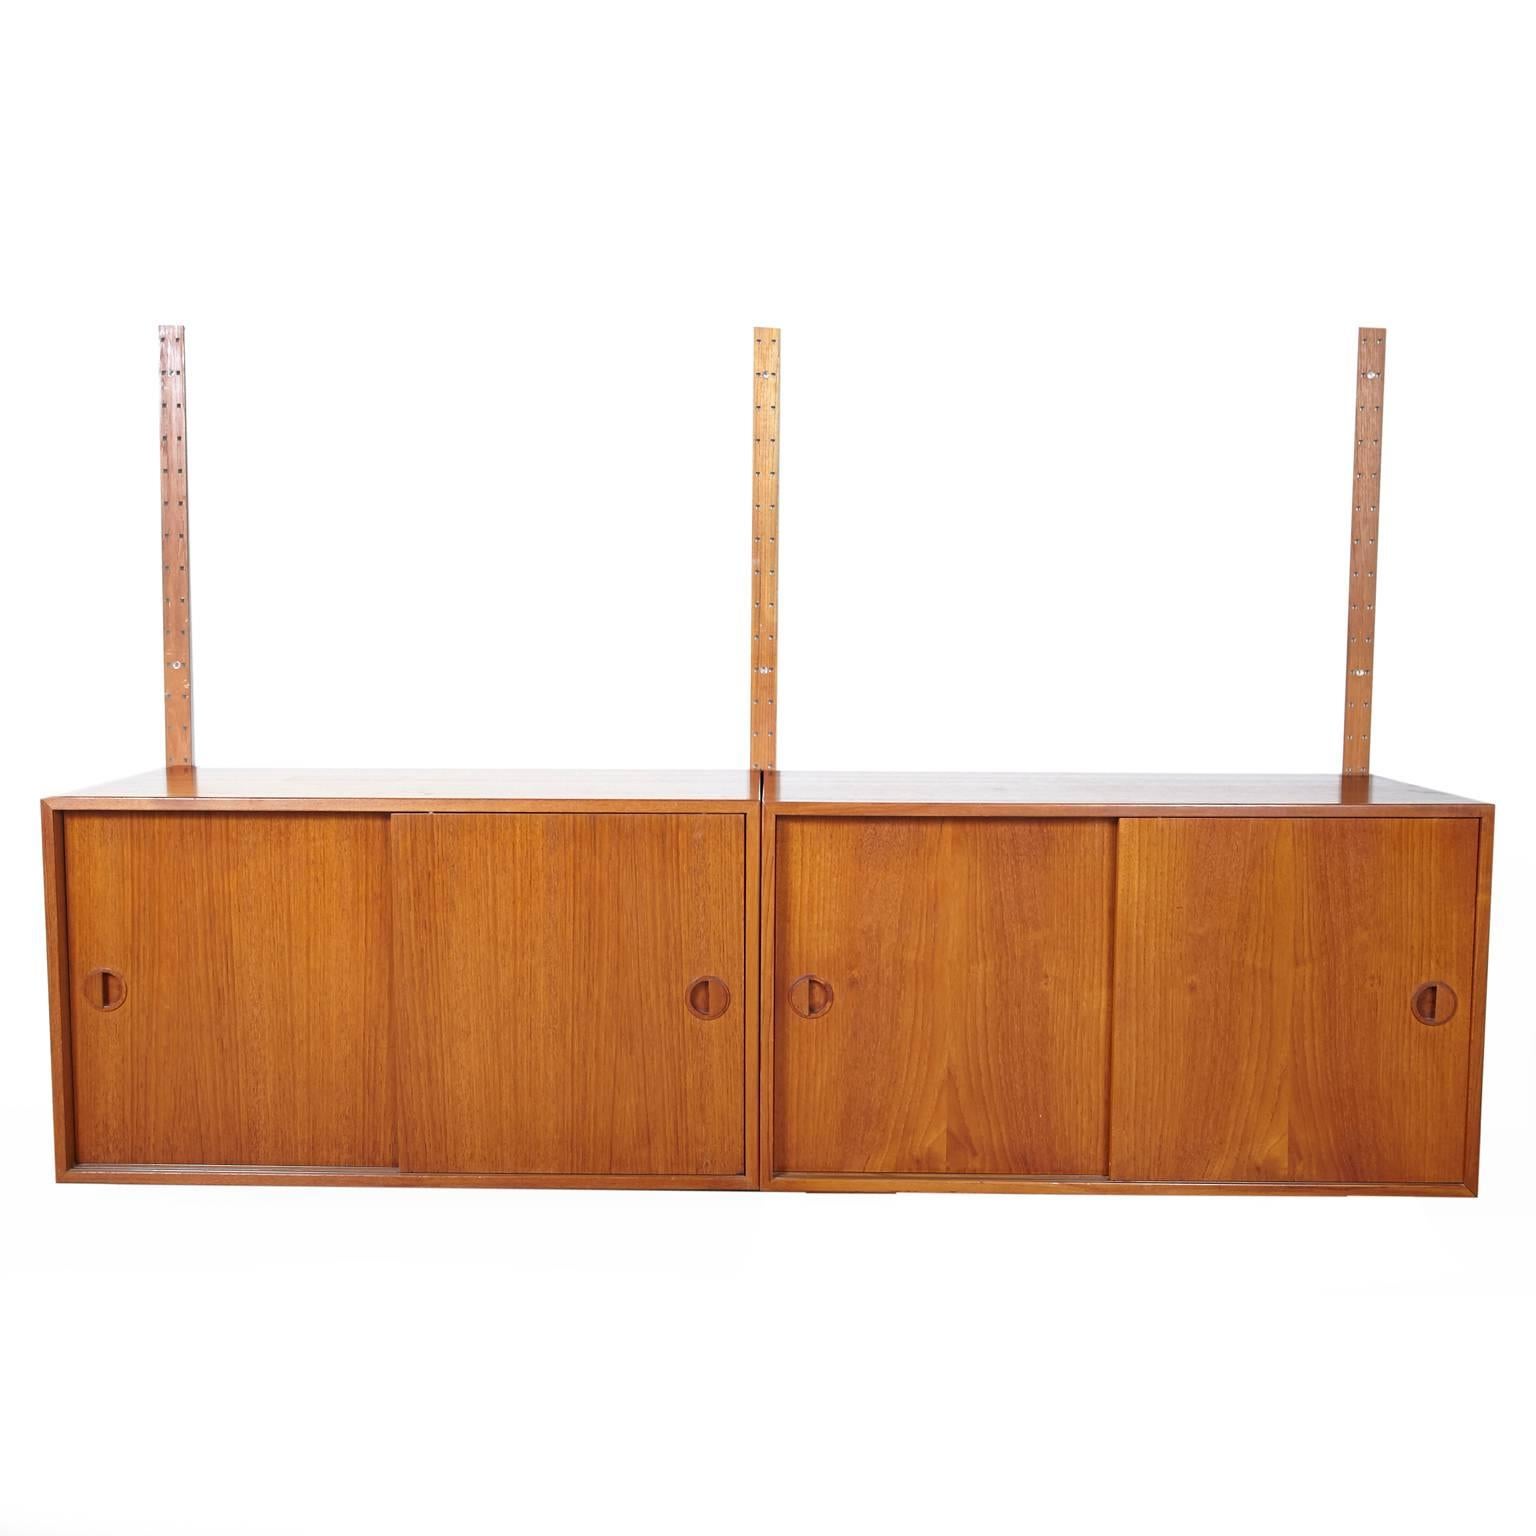 Attractive two-cabinet floating wall unit made by Hansen and Guldborg (HG Furniture), in Denmark. Stamped on back. Complete with three metal rails,
eight brackets, and screws for mounting. Measurements listed were for lower cabinet. Upper cabinet